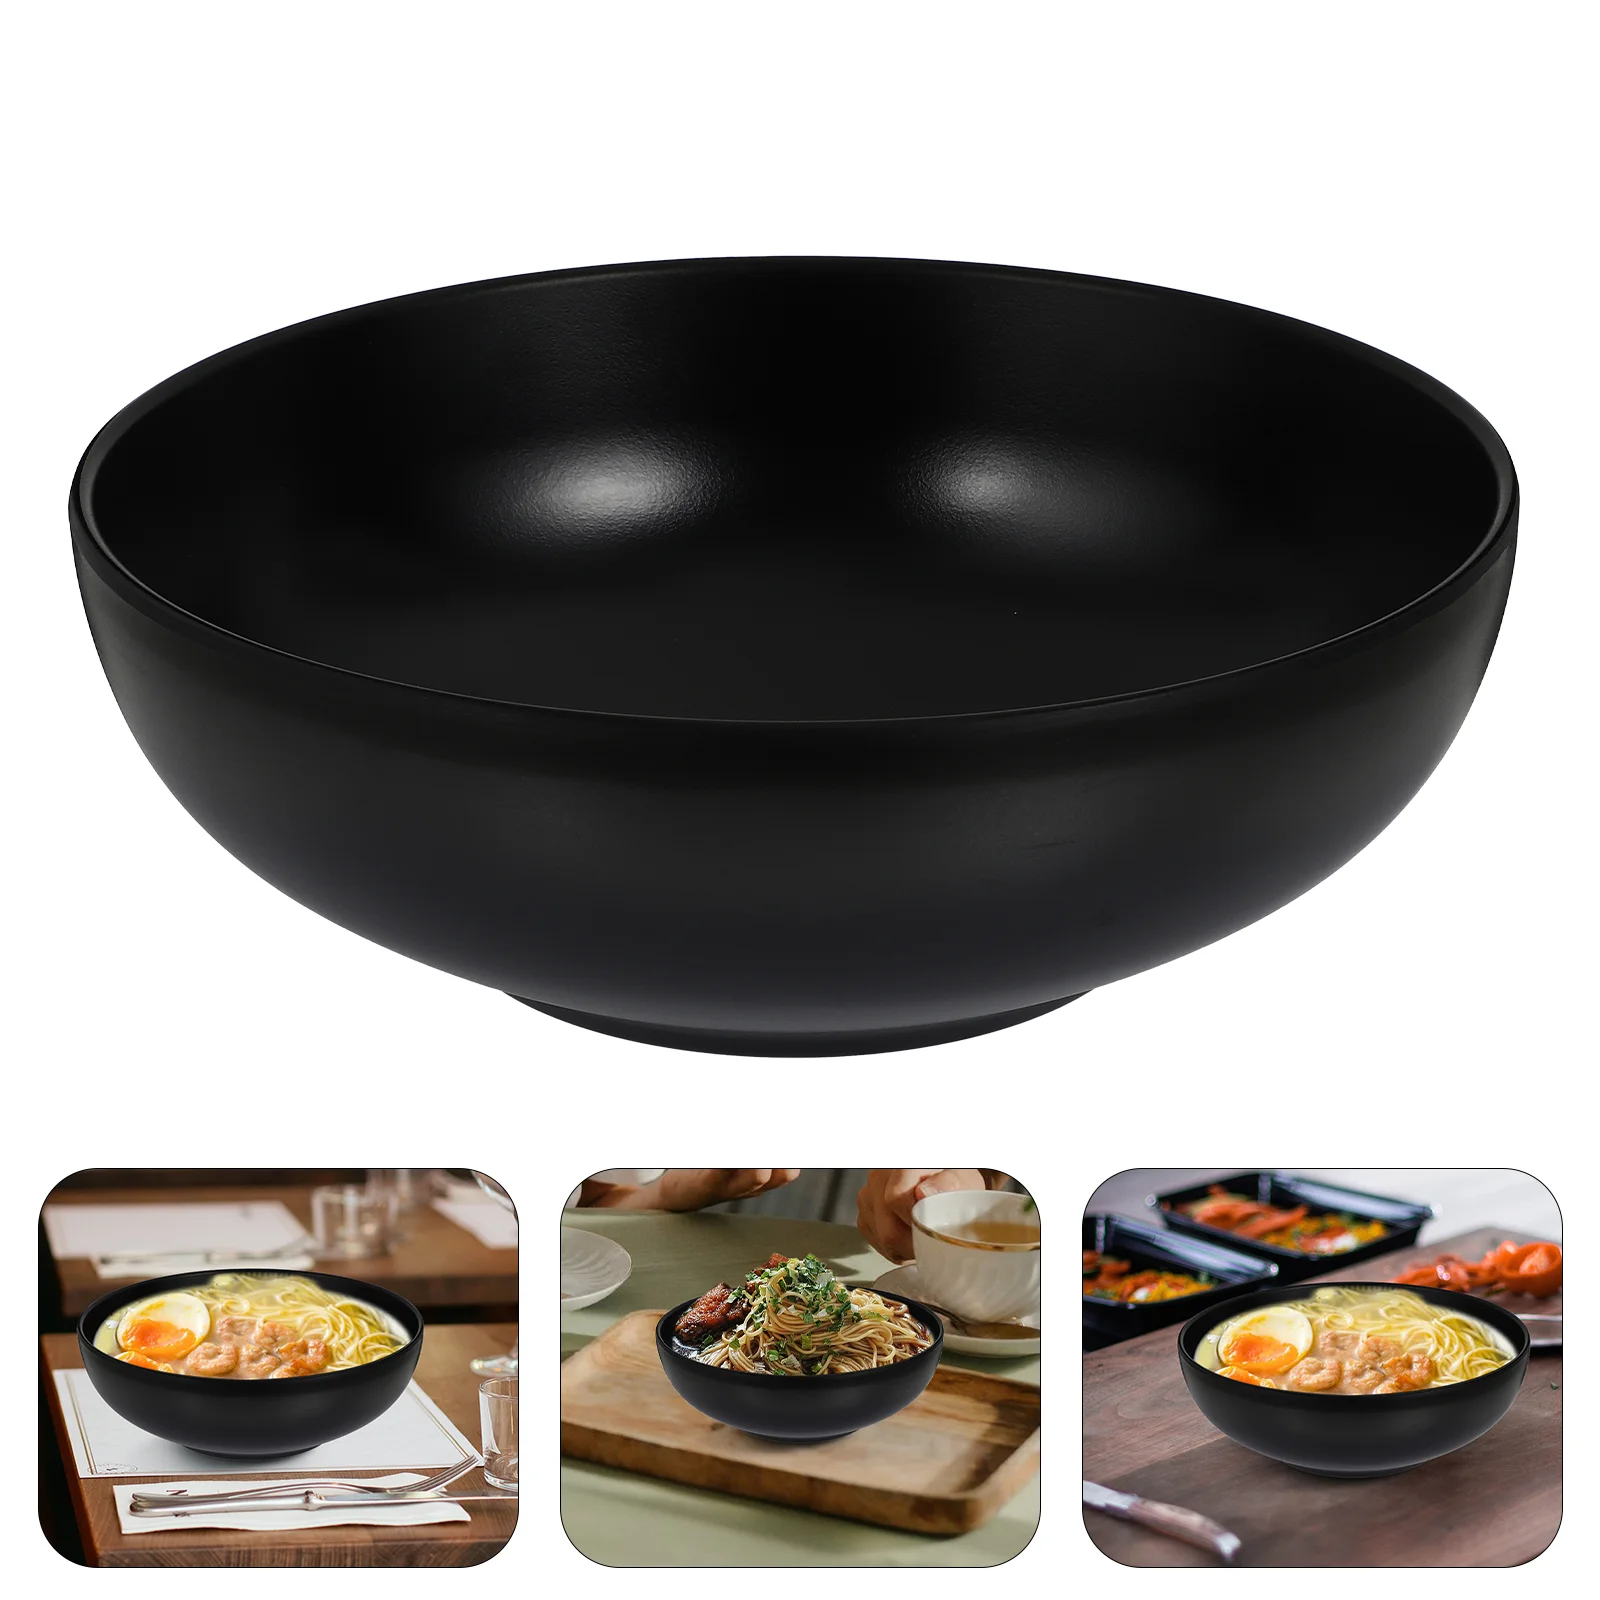 

Bowl Bowls Ramen Noodle Melamine Japanese Soup Container Serving Cereal Pho Ceramic Salad Large Tableware Chinese Mixing Black